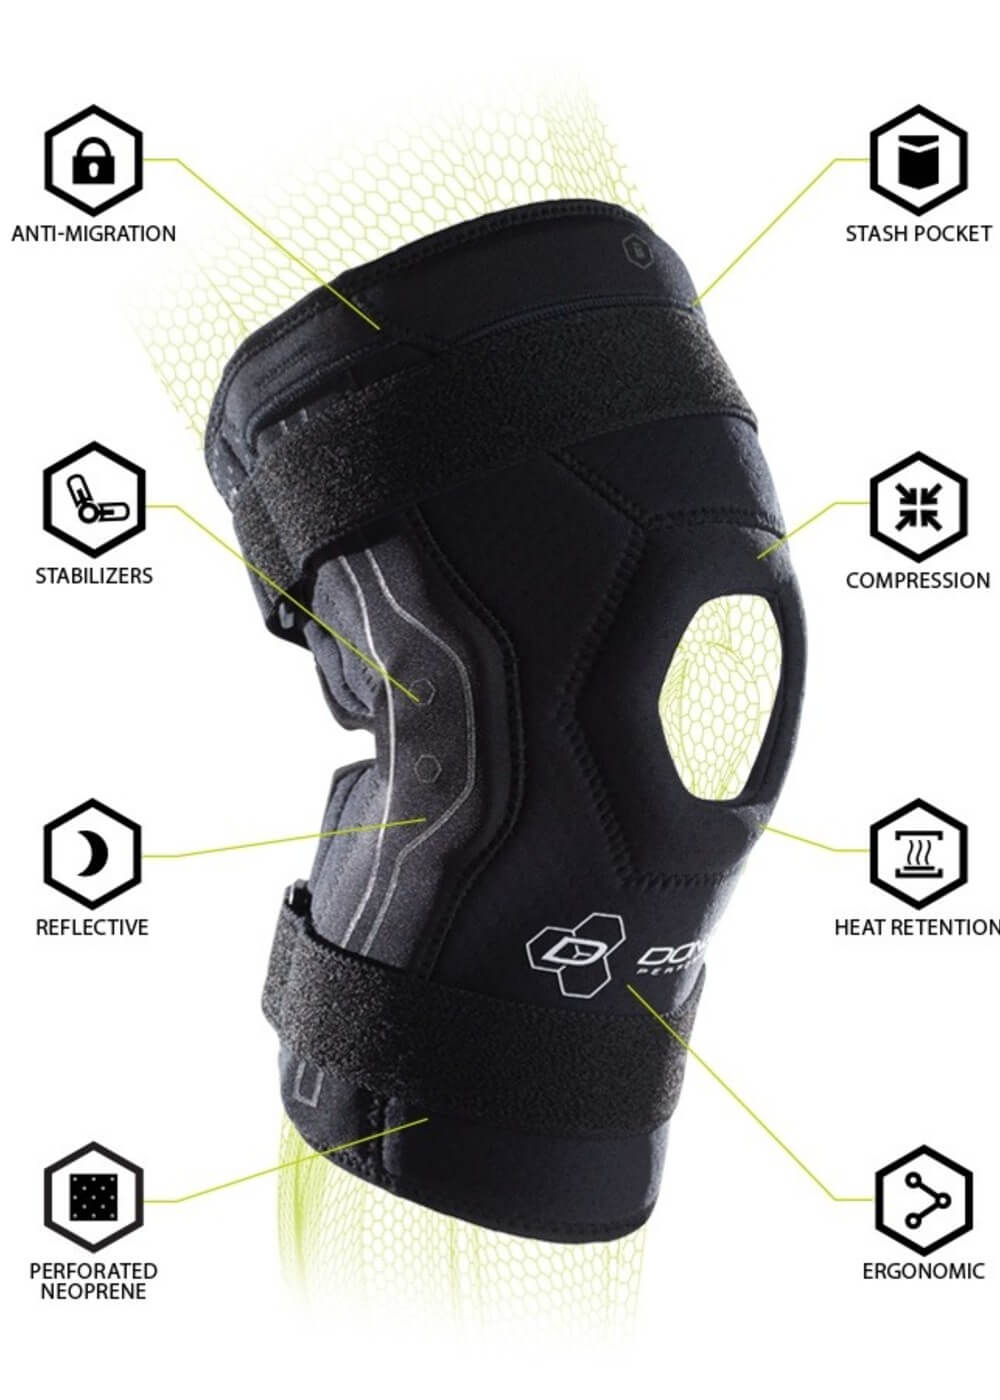 donjoy performance bionic knee brae features